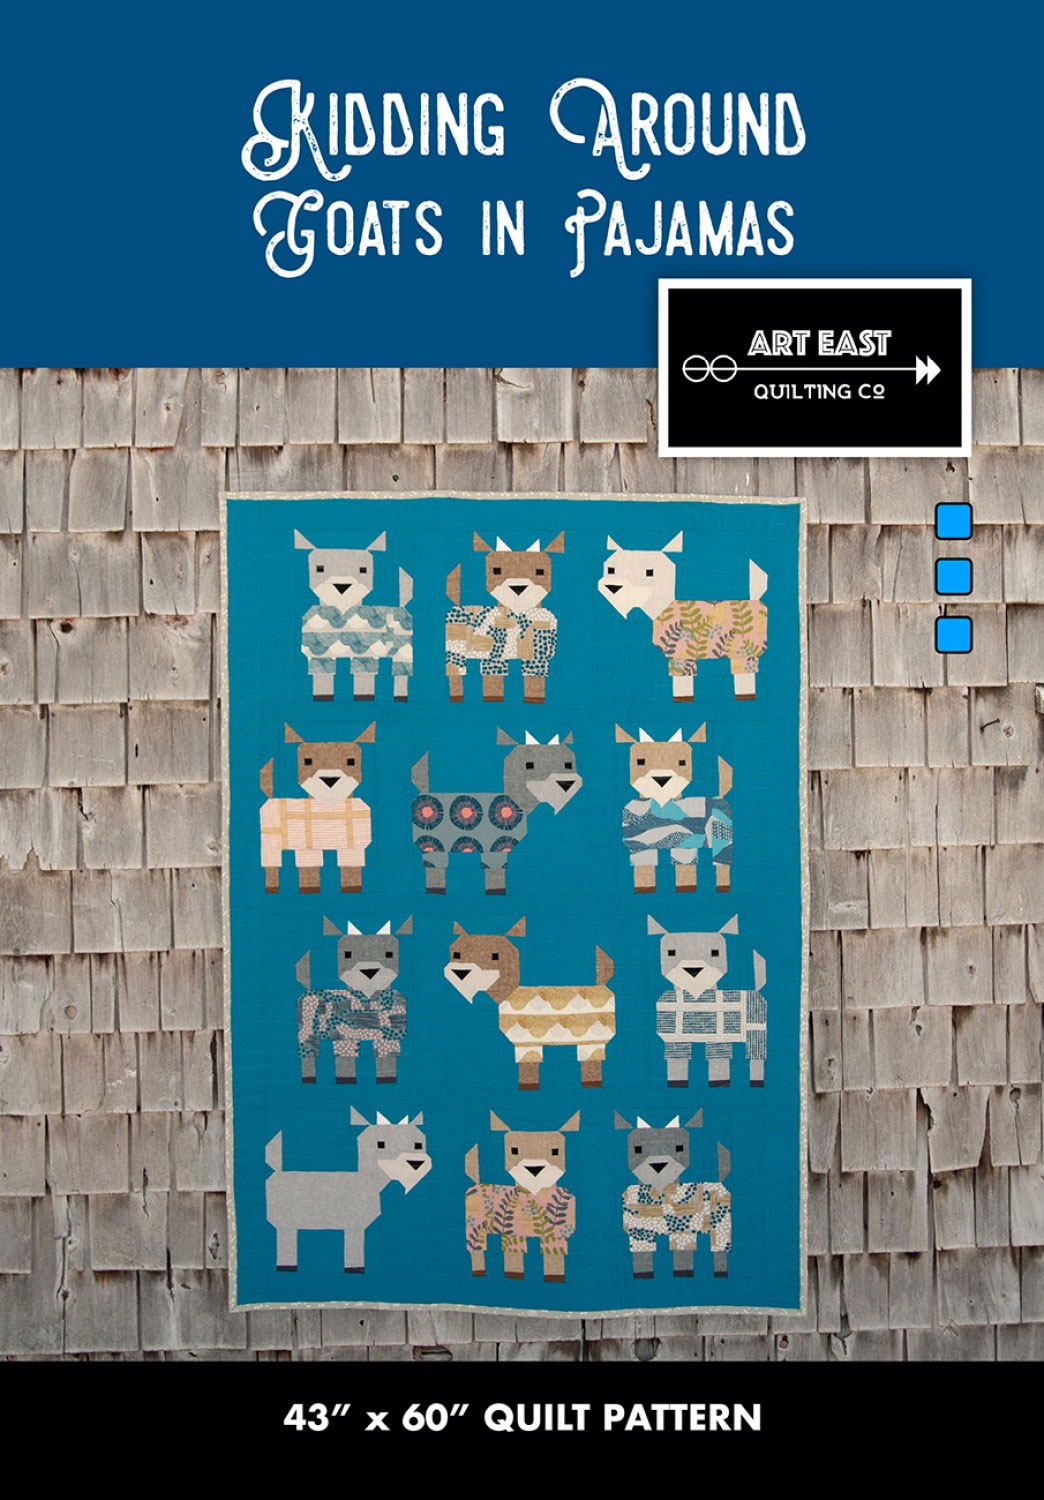 Kidding-Around-Goats-in-Pajamas-sewing-pattern-Art-East-Quilting-Co-front